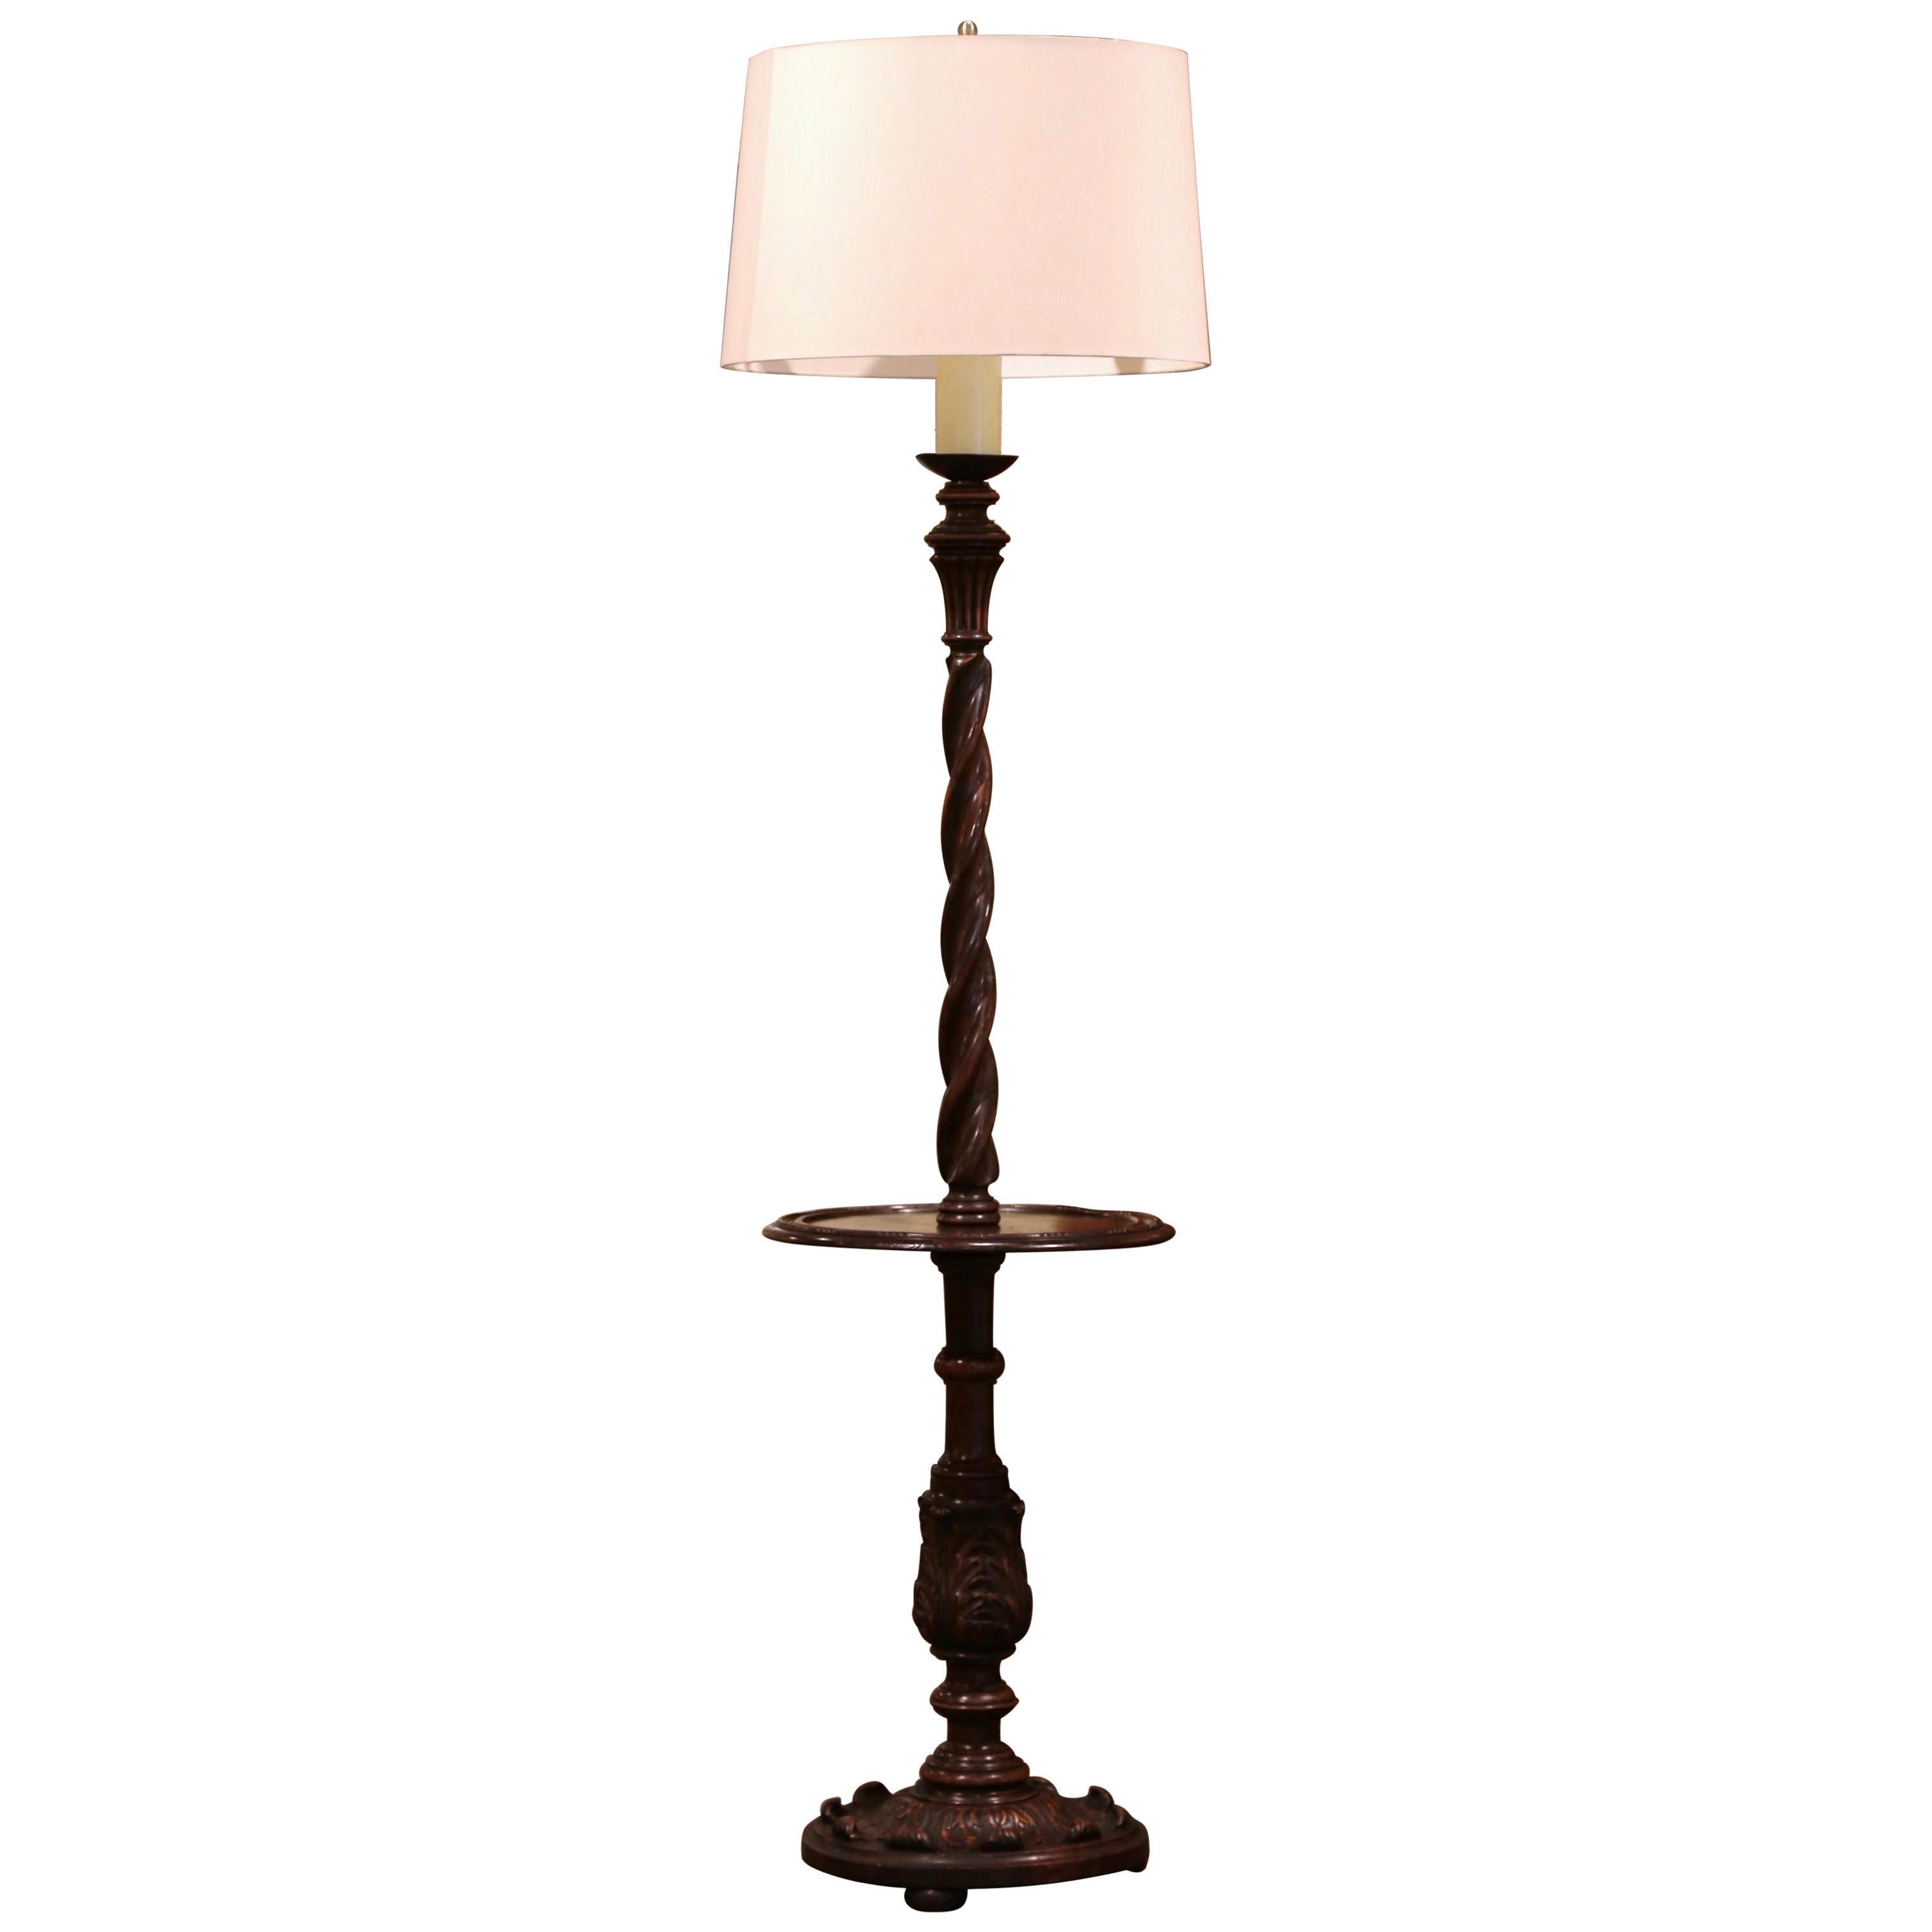 Early 20th Century French Carved and Barley Twist Floor Lamp with Attached Table